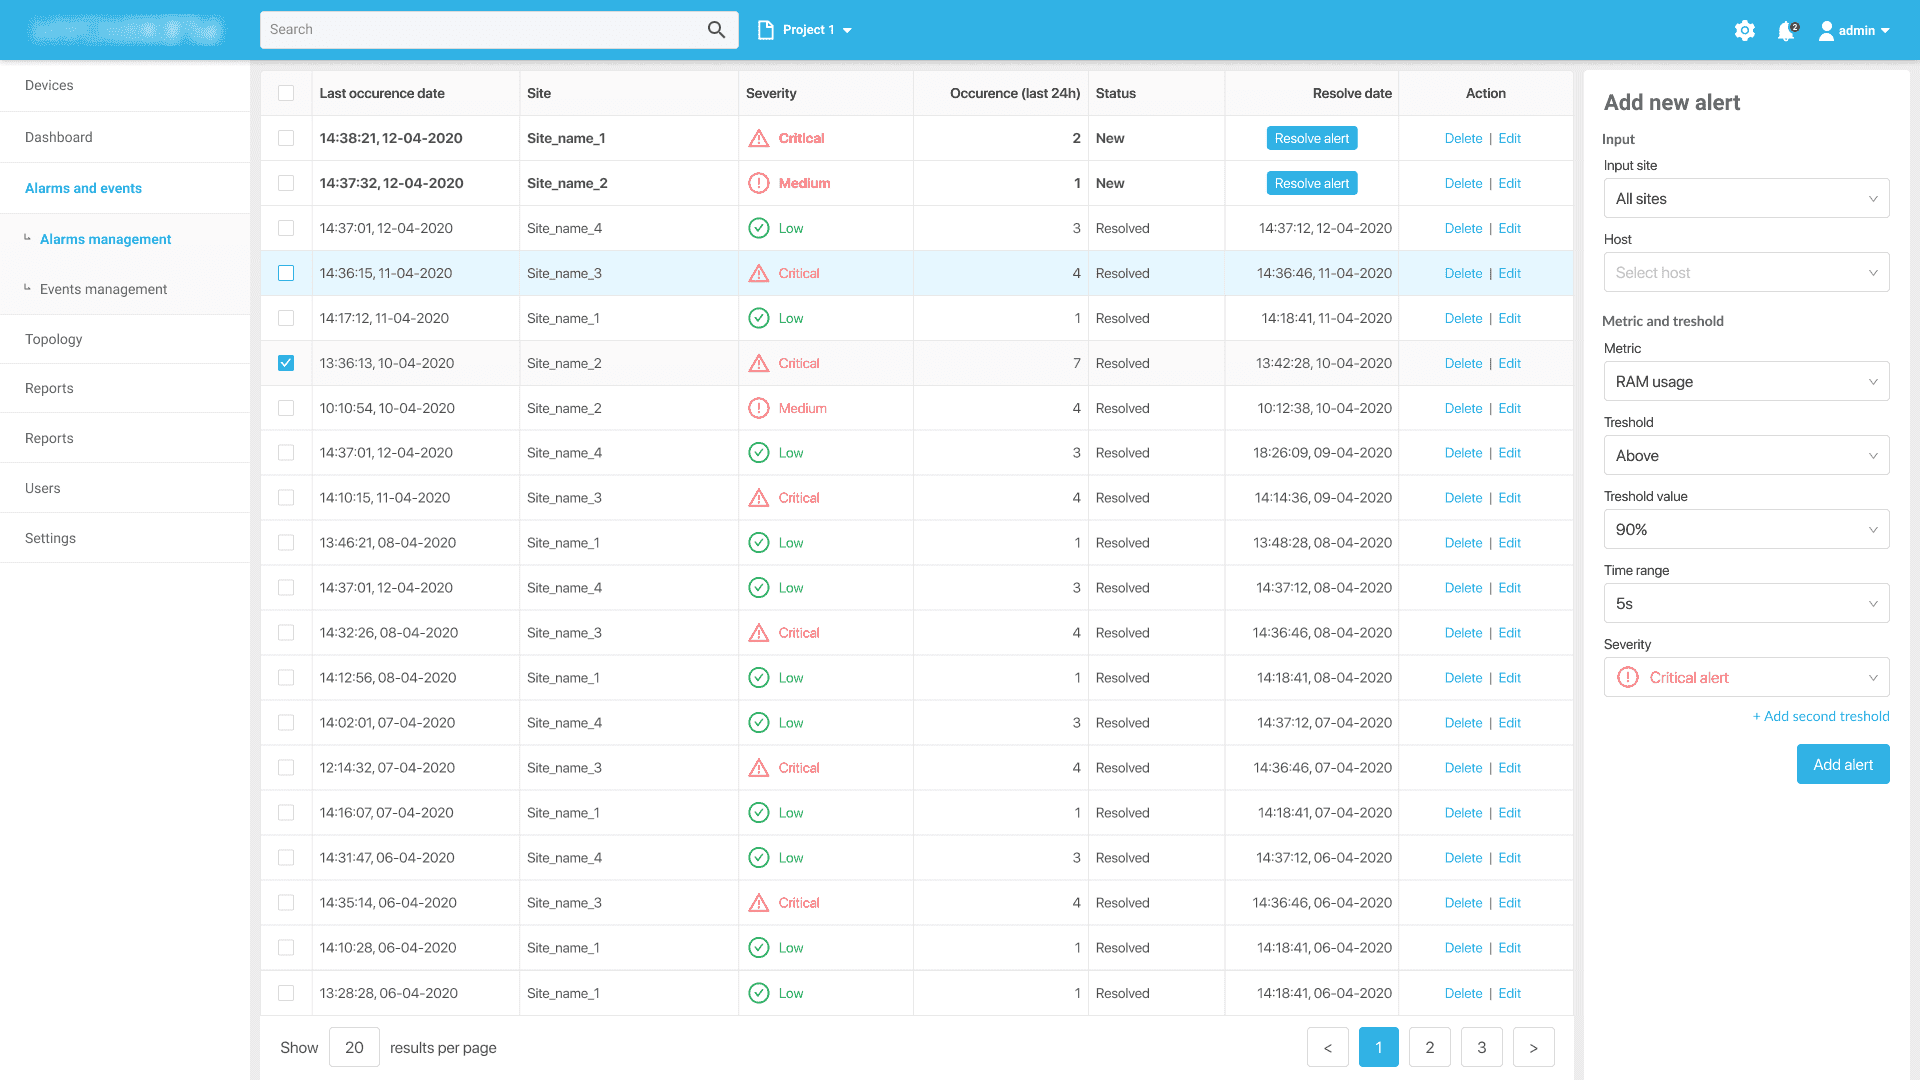 Final product - view with alerts and notifications